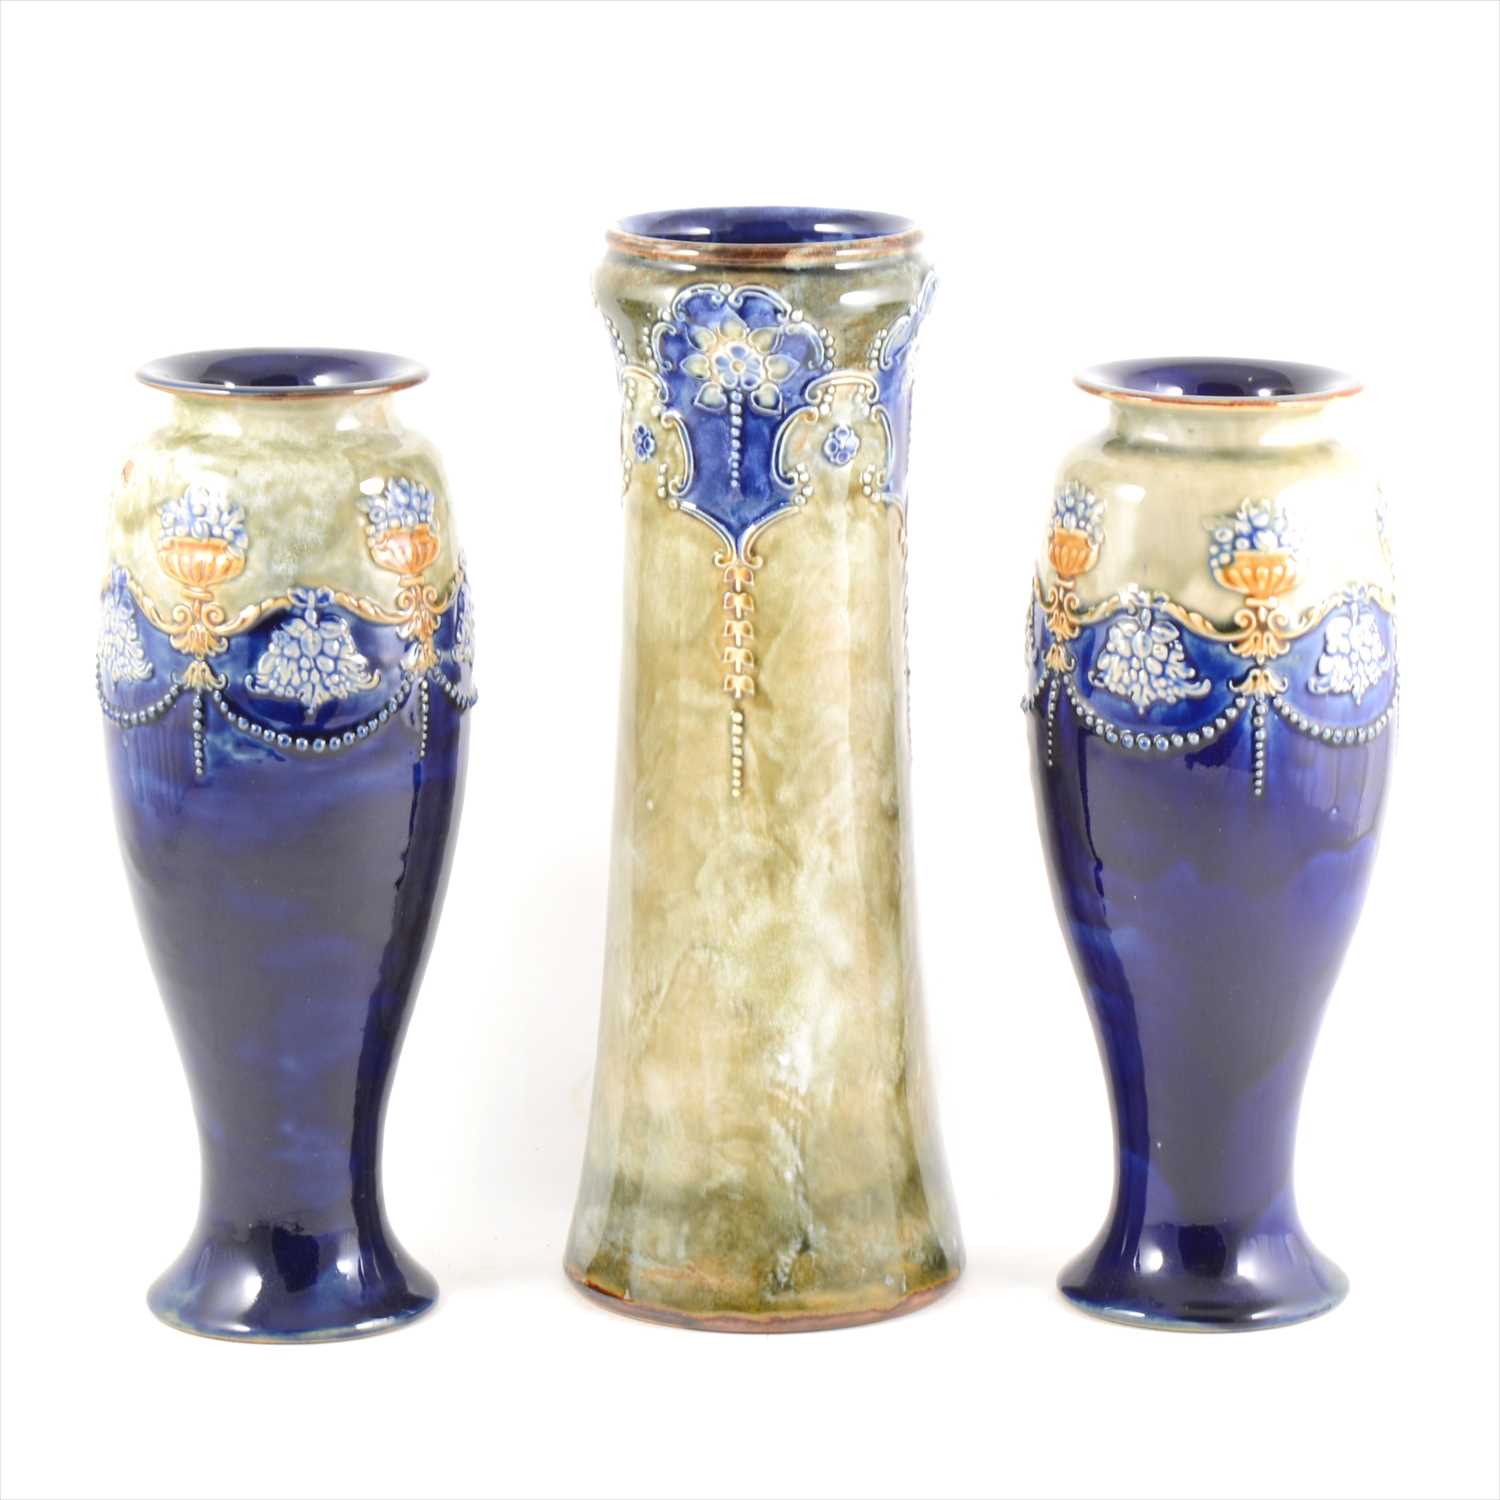 Lot 40 - A pair of Doulton stoneware vases and similar single cylindrical vase.